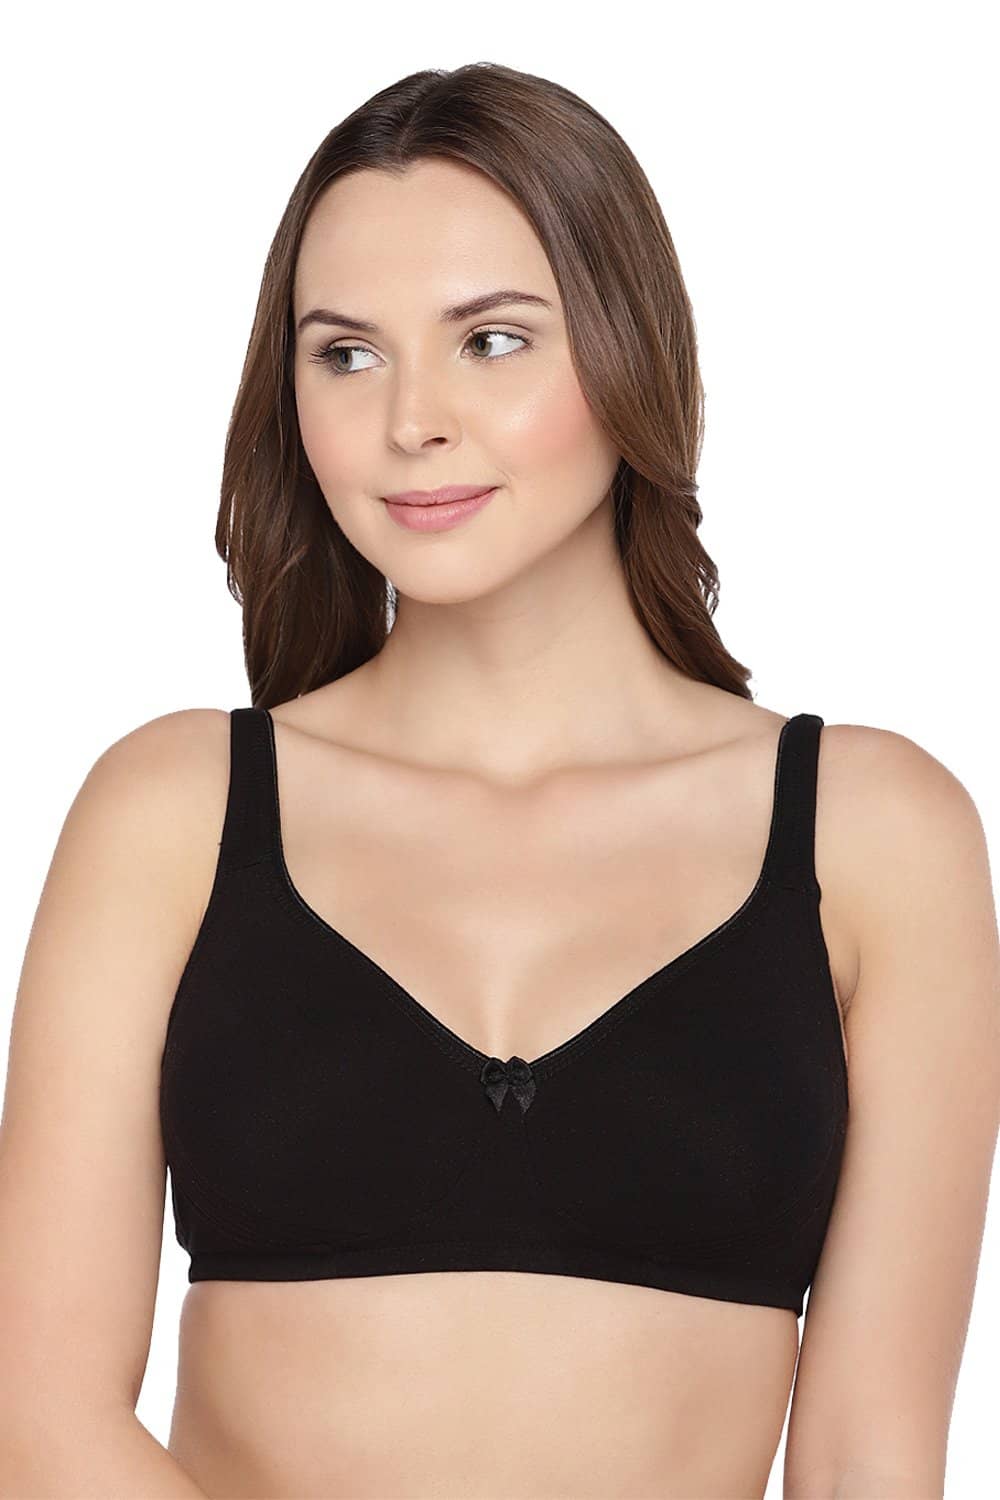 Organic Cotton  Antimicrobial  Seamless Side Support Bra (Pack of 3)-ISB057-B.Pink_B.Pink_Black-